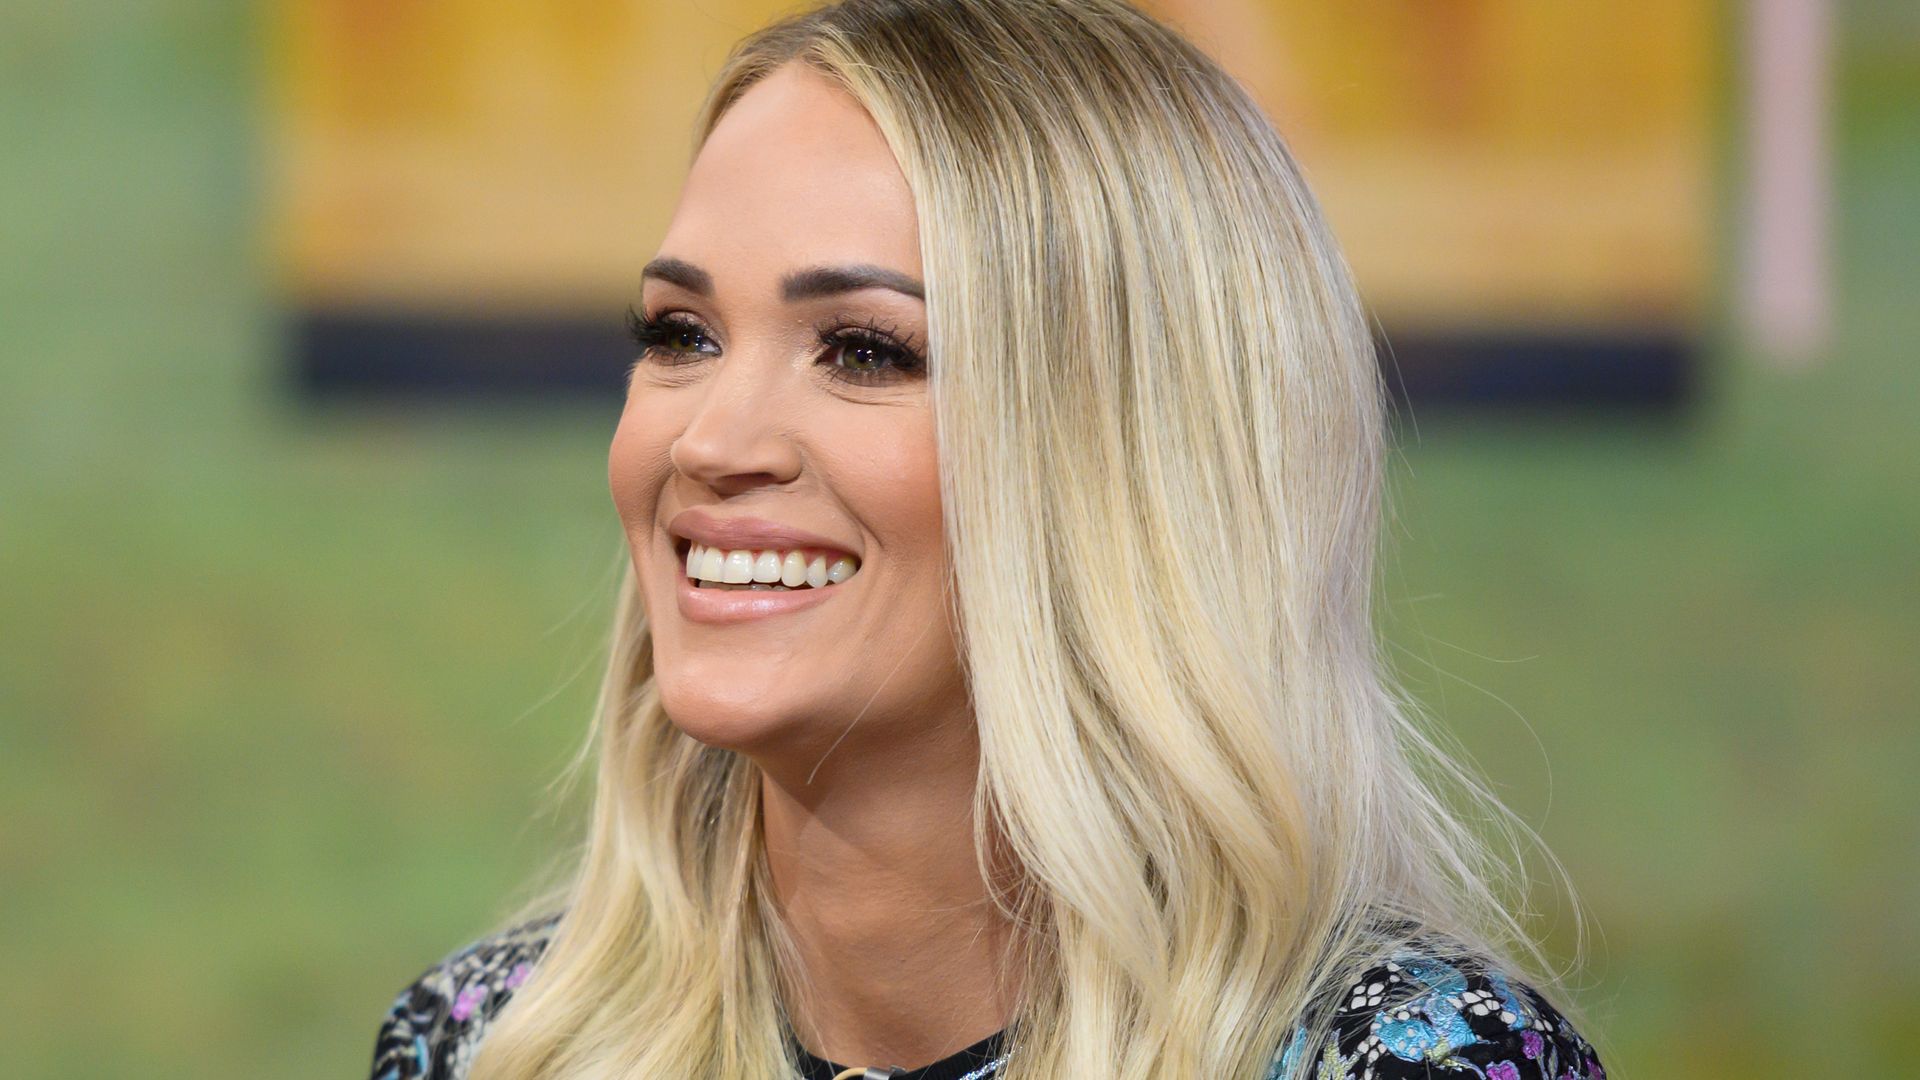 Carrie Underwood shares unrecognizable epic throwback photo